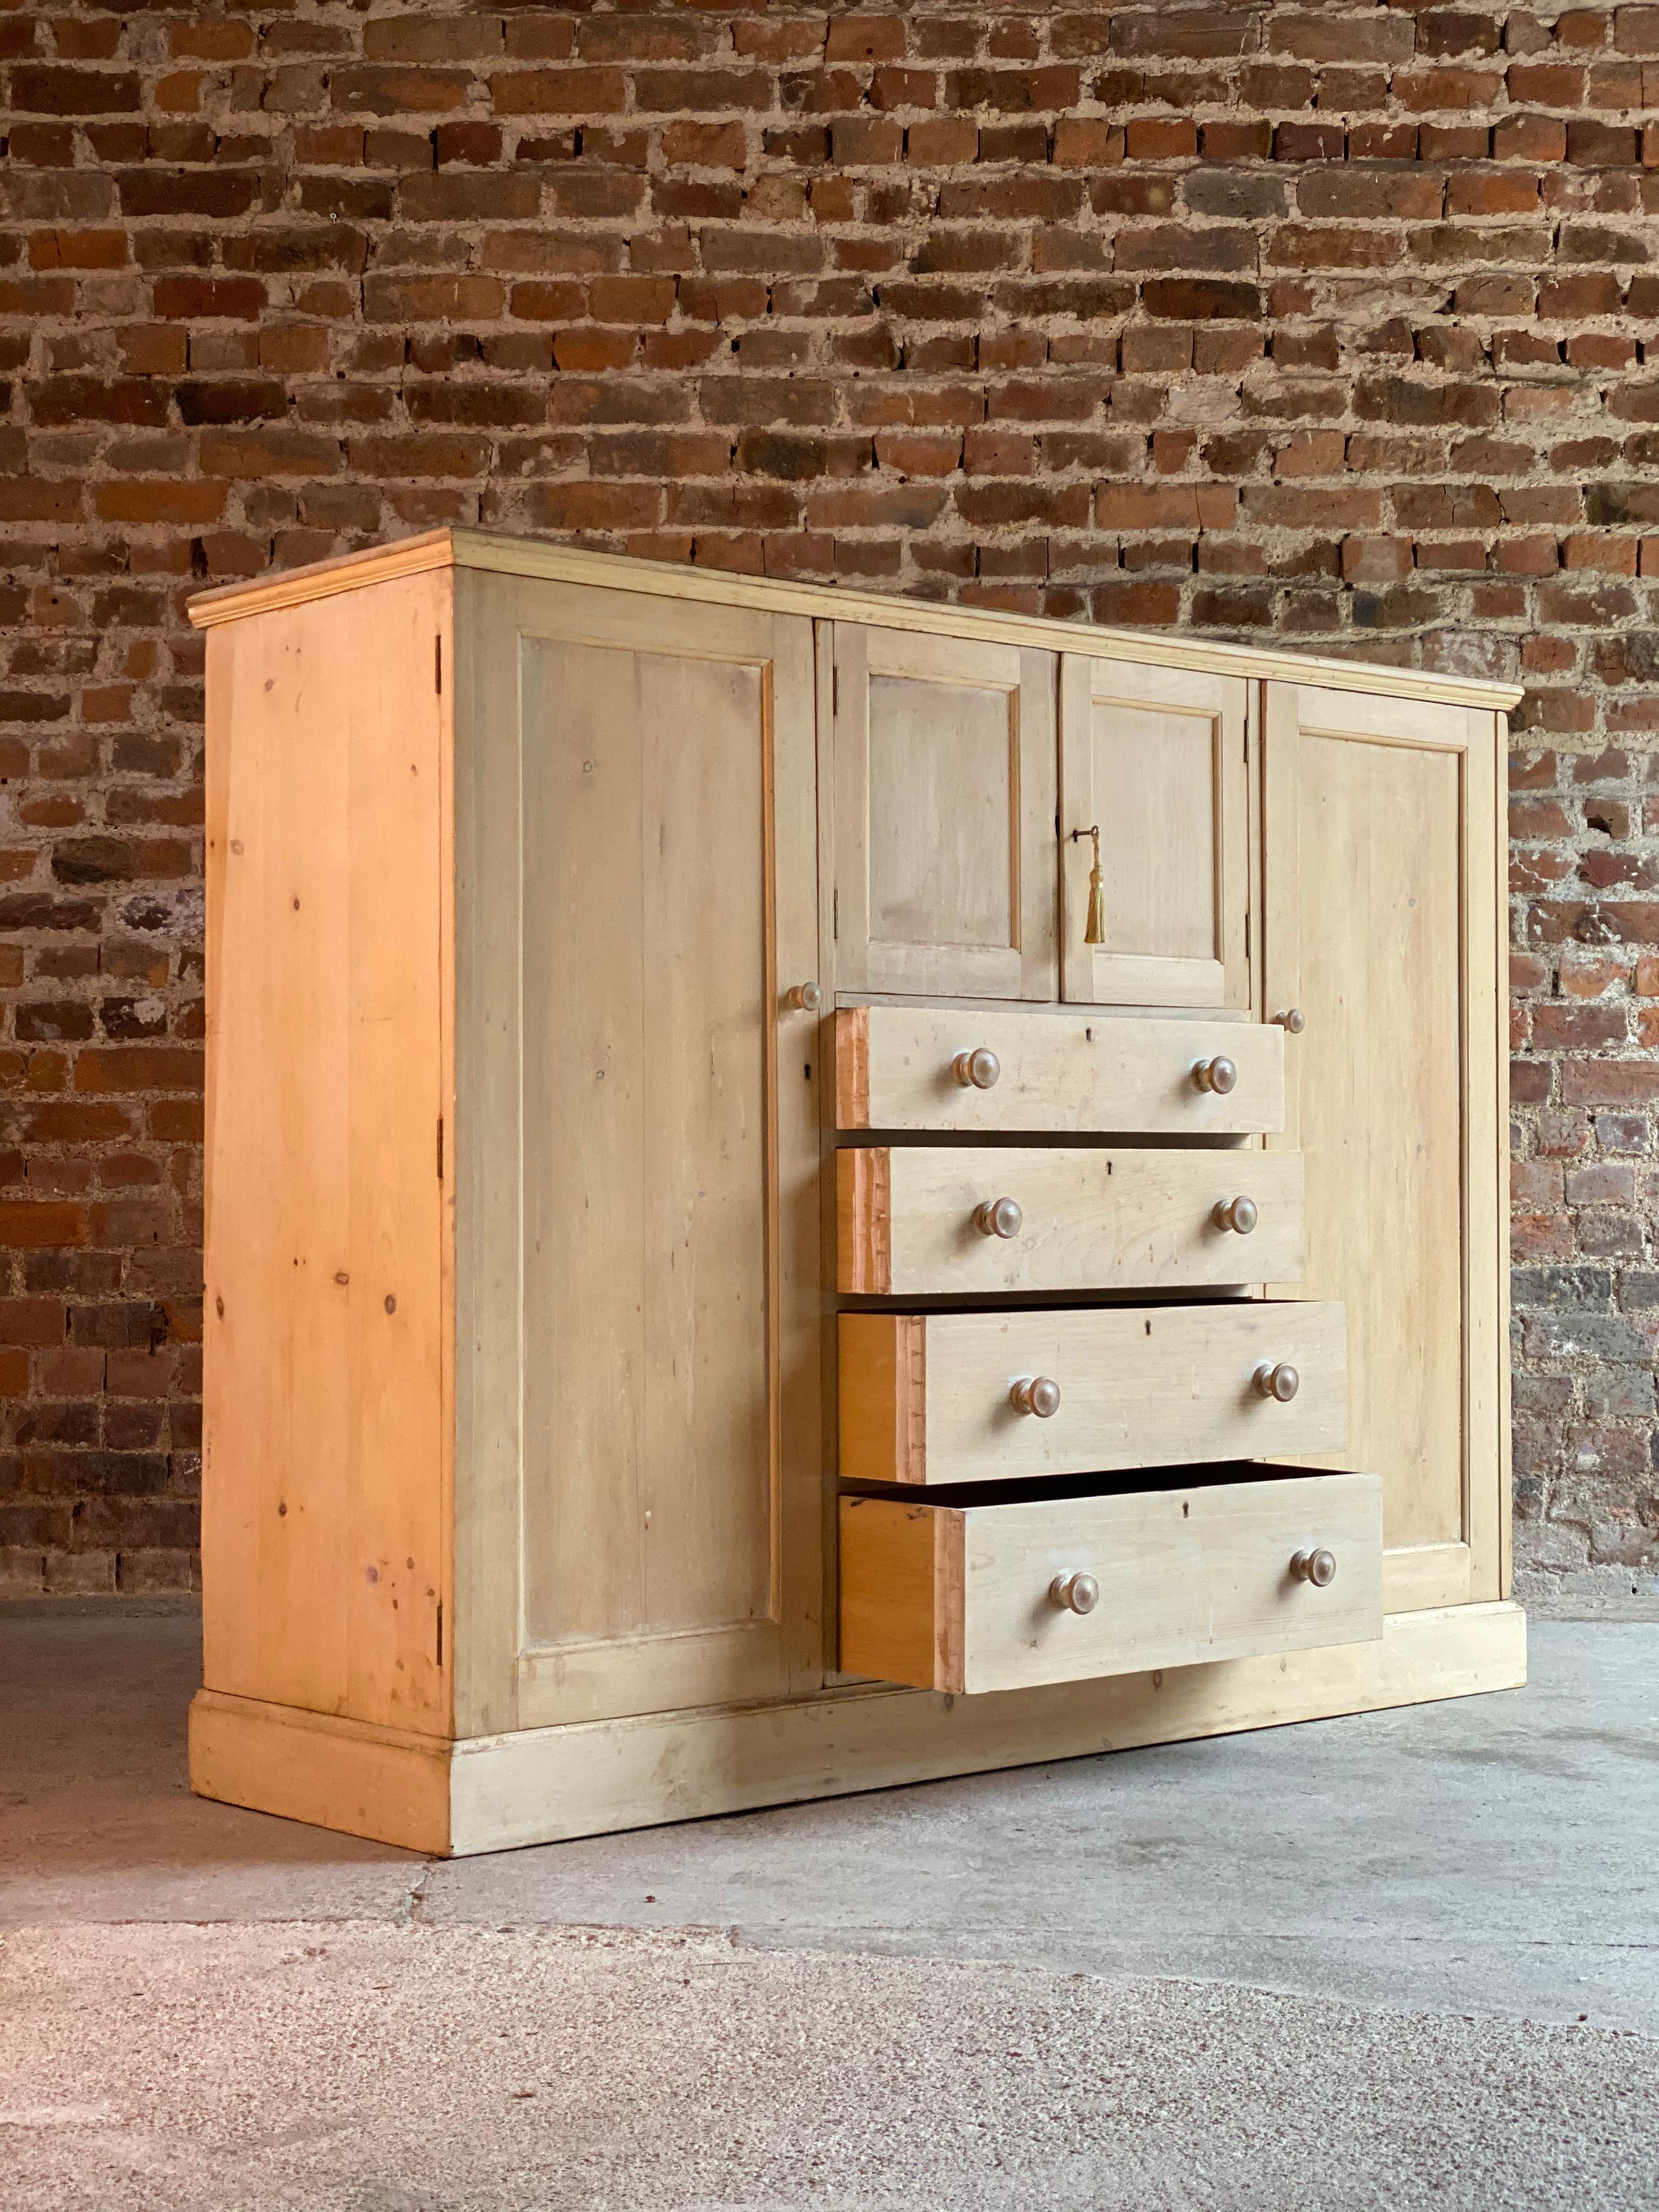 Fabulous 19th century stripped pine low wardrobe, the moulded top above two central panel doors over four long drawers with knob handles flanked by two panel doors enclosing shelved interior, with various hanging hooks, the cupboard to the right